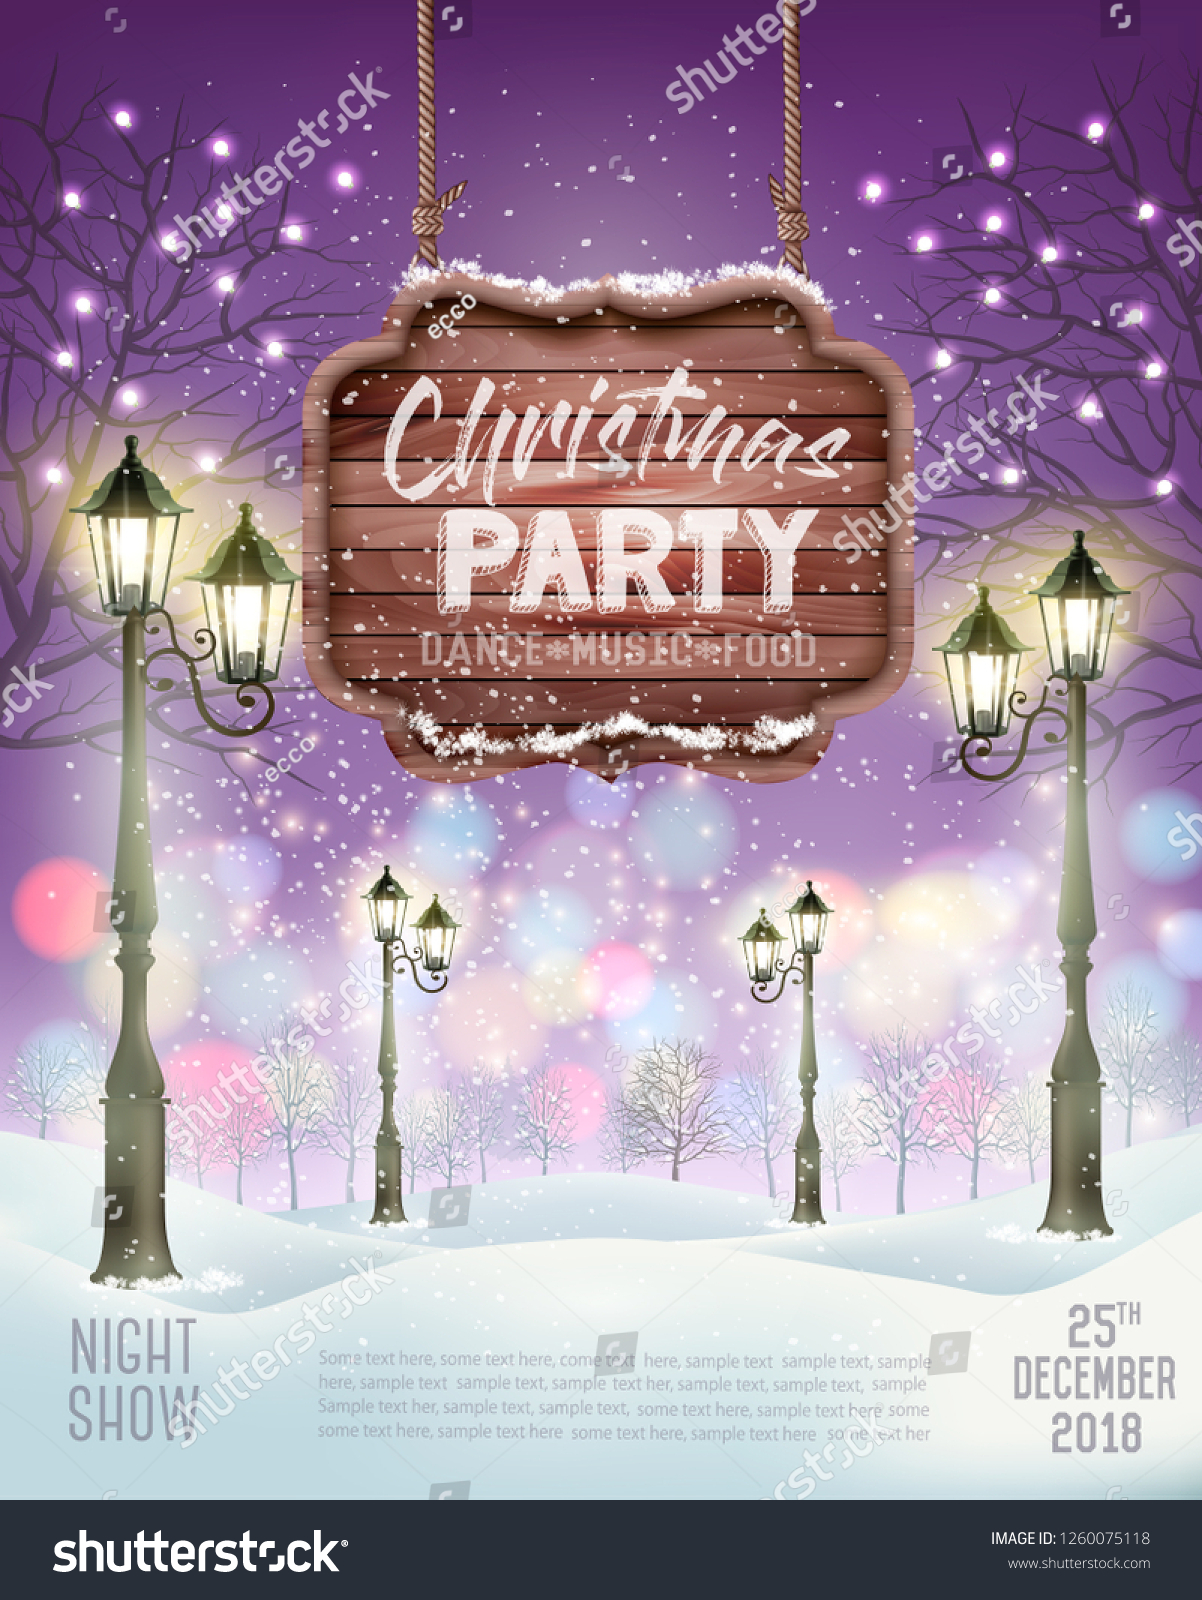 Merry Christmas Party Flyer Background Evening Stock Vector Royalty Free